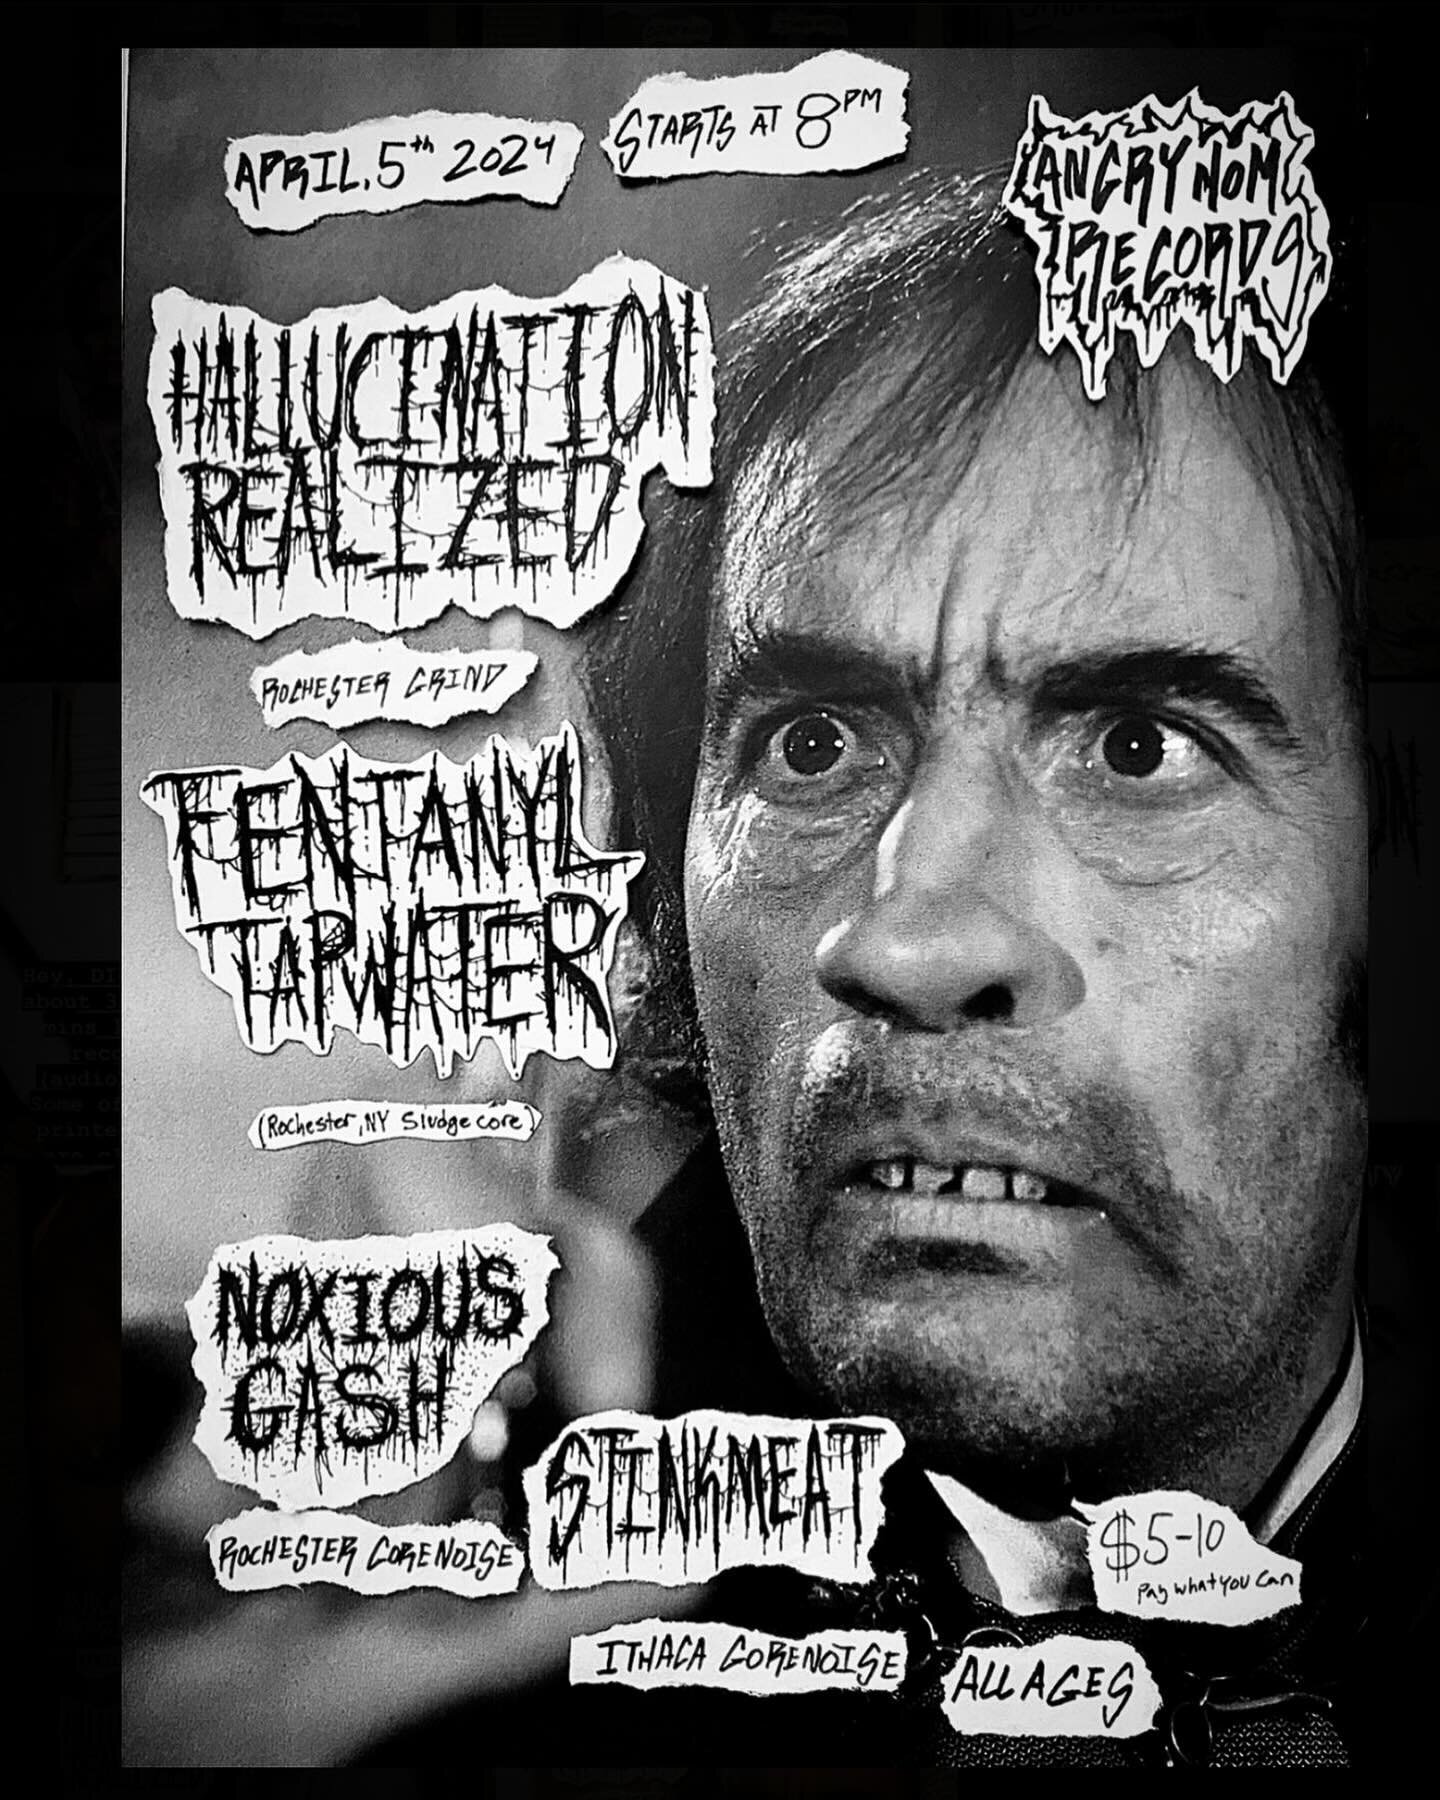 Live Shows just keep on coming to the shop. This Friday (4/5)  shit is going to get HEAVY with Hallucination Realized (Rochester Grind), Fentanyl Tapwater (Rochester Sludgecore), Noxious Gash (Rochester Gorenoise) &amp; Stink Meat (Ithaca Gore)❕This 